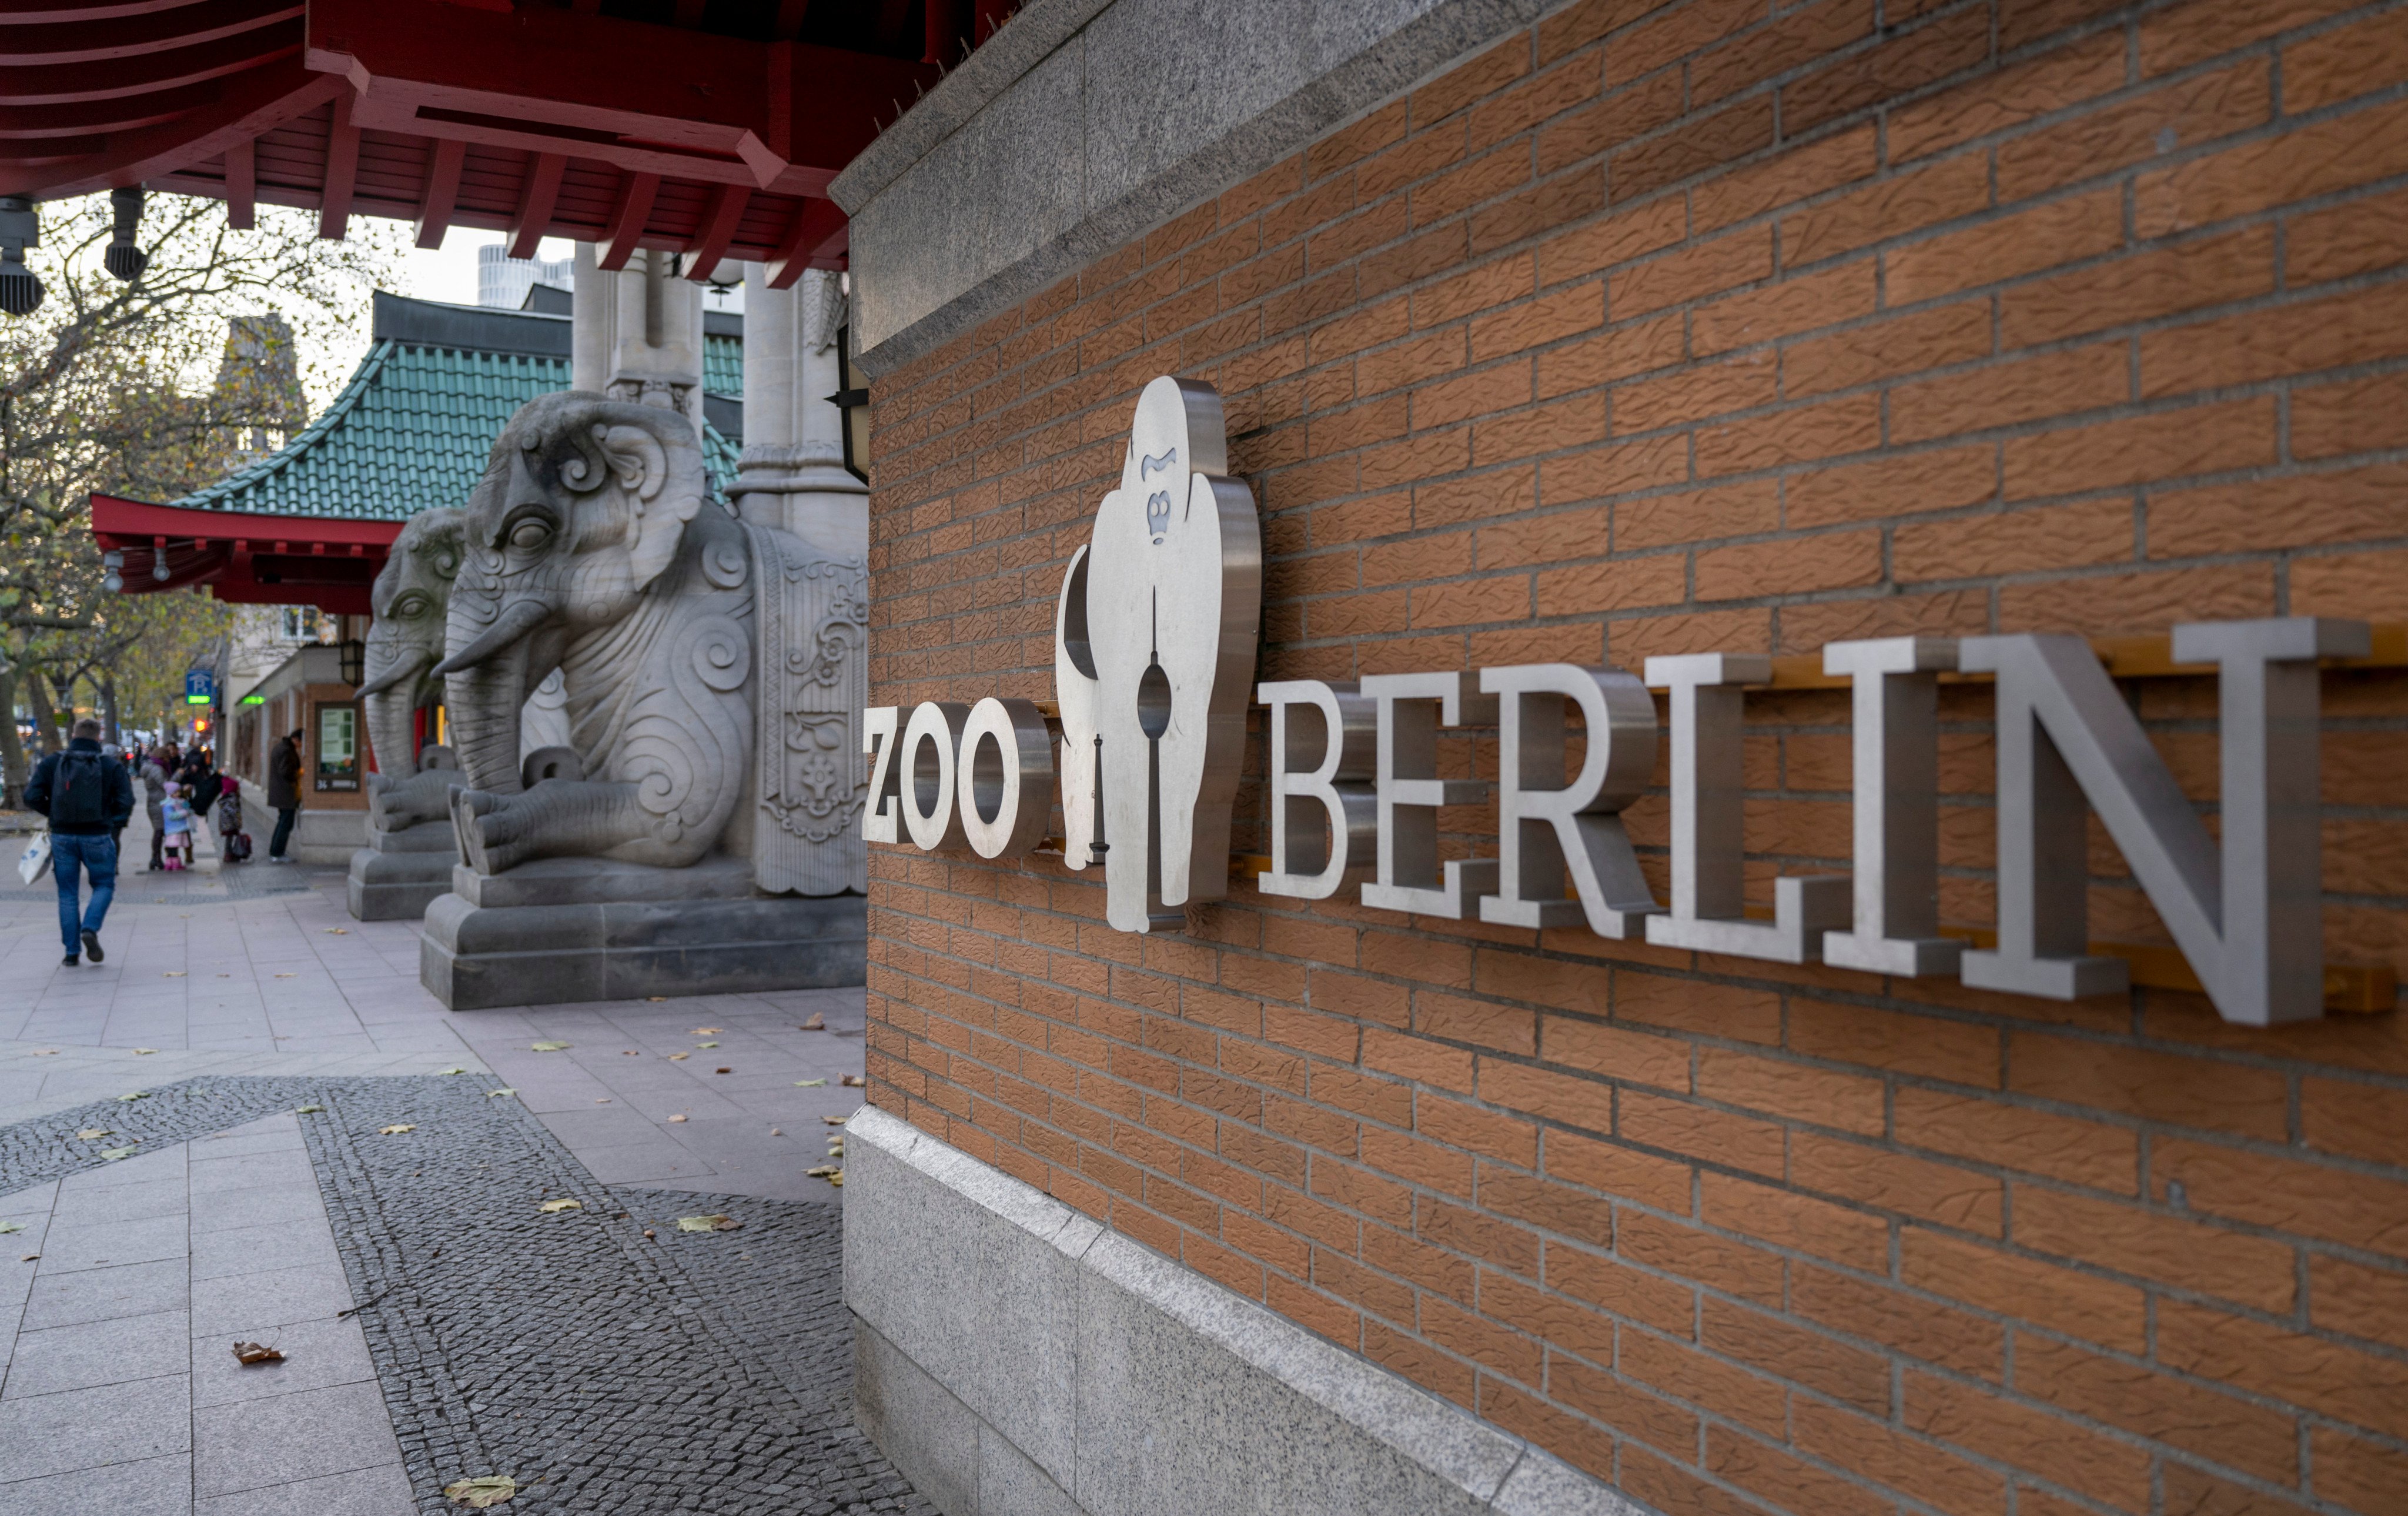 The entrance to Berlin Zoo in Berlin, Germany on Friday which has shut its doors to visitors after one of its aquatic birds tested positive for avian flu. Photo: dpa via AP